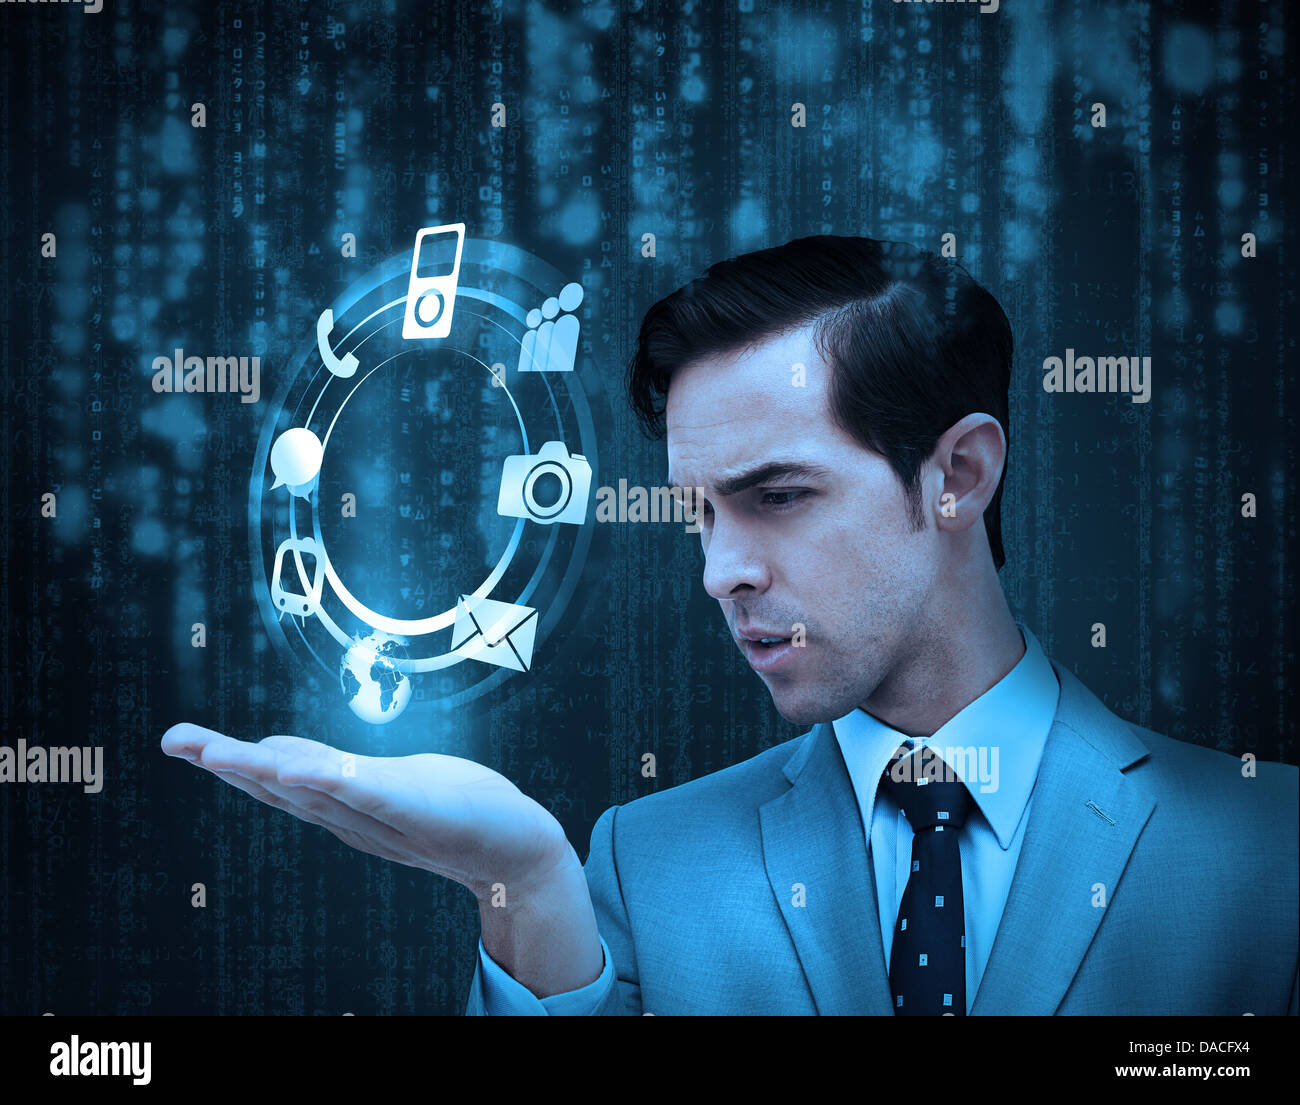 Businessman holding a hologram with smartphone applications Stock Photo